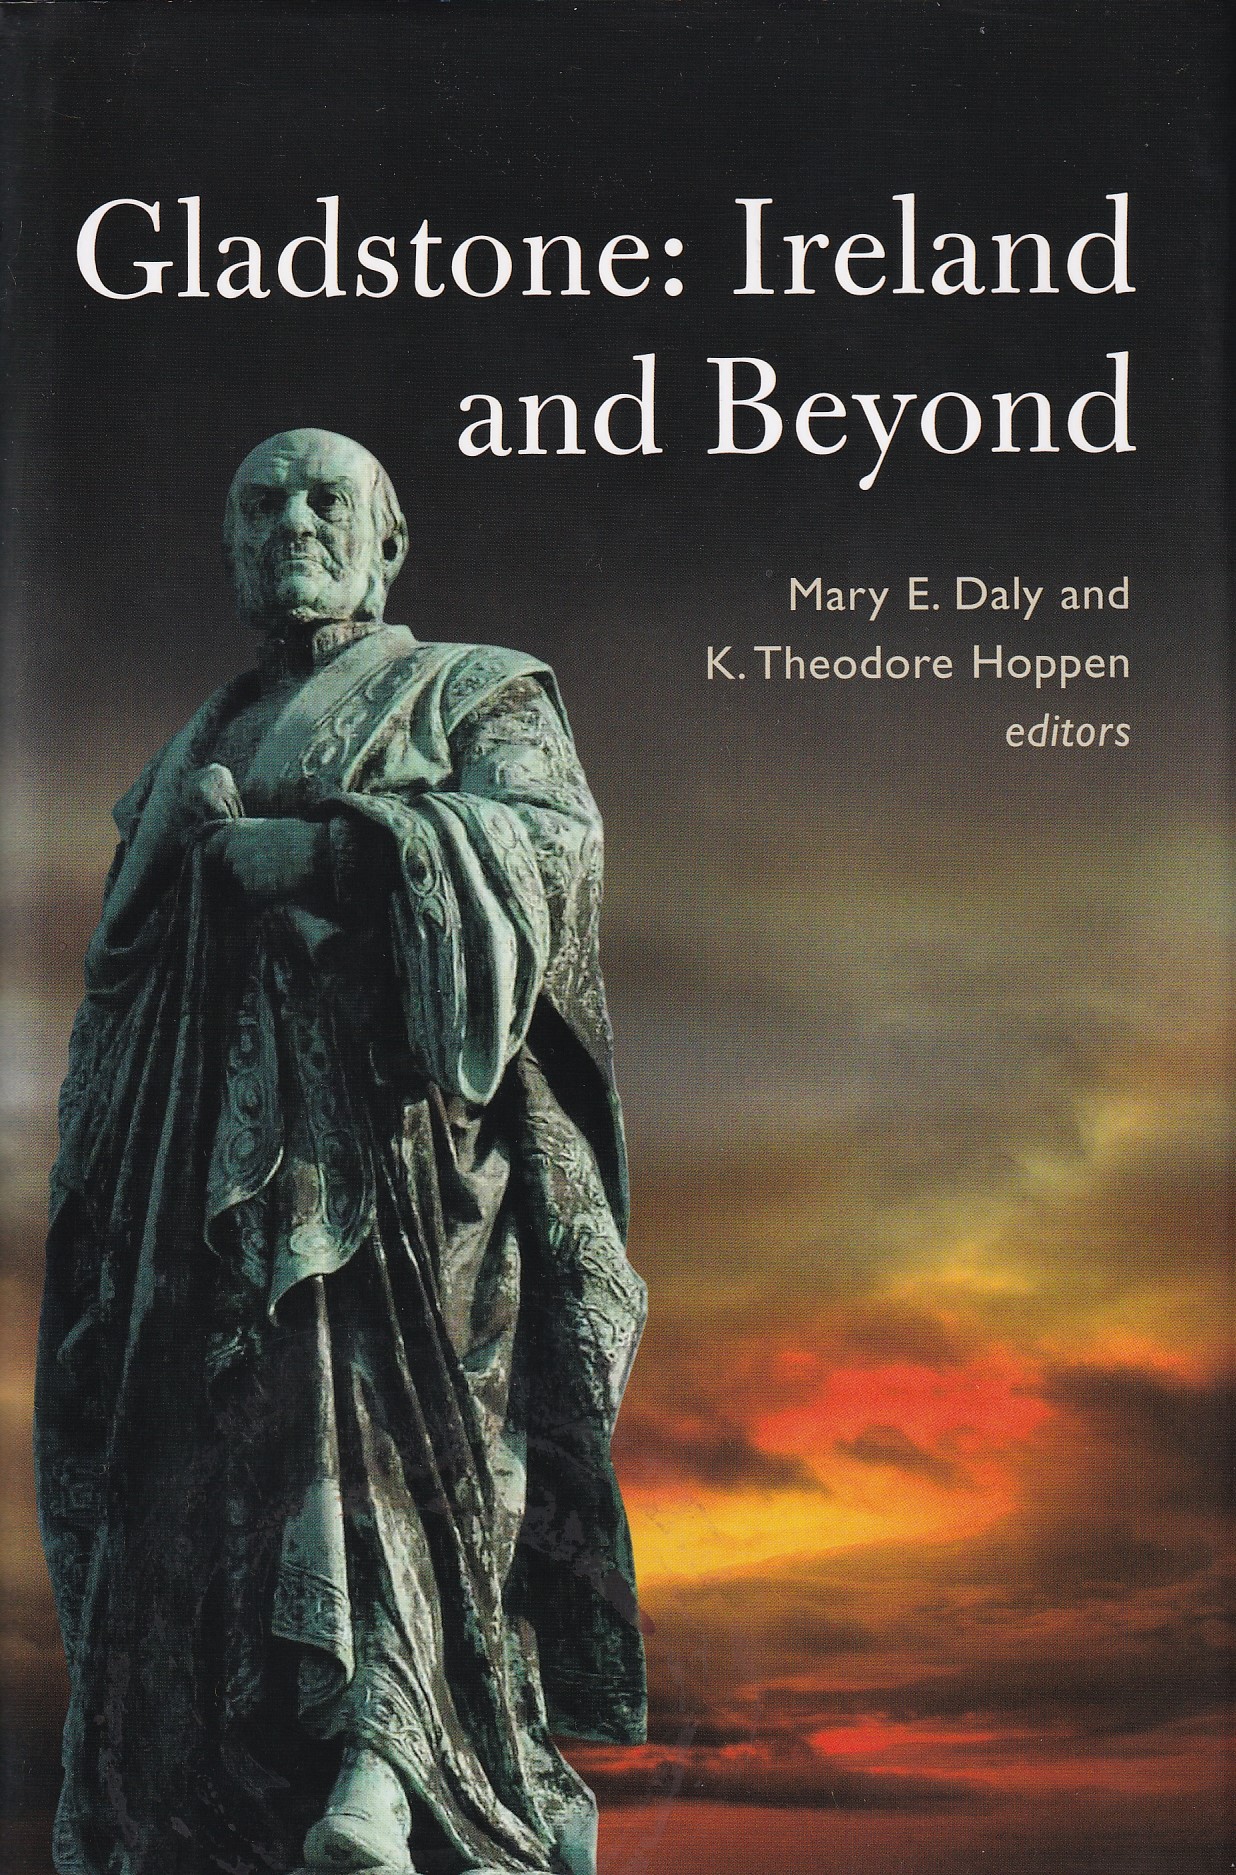 Gladstone: Ireland and Beyond by Mary E. Daly & K. Theodore Hoppen (eds.)